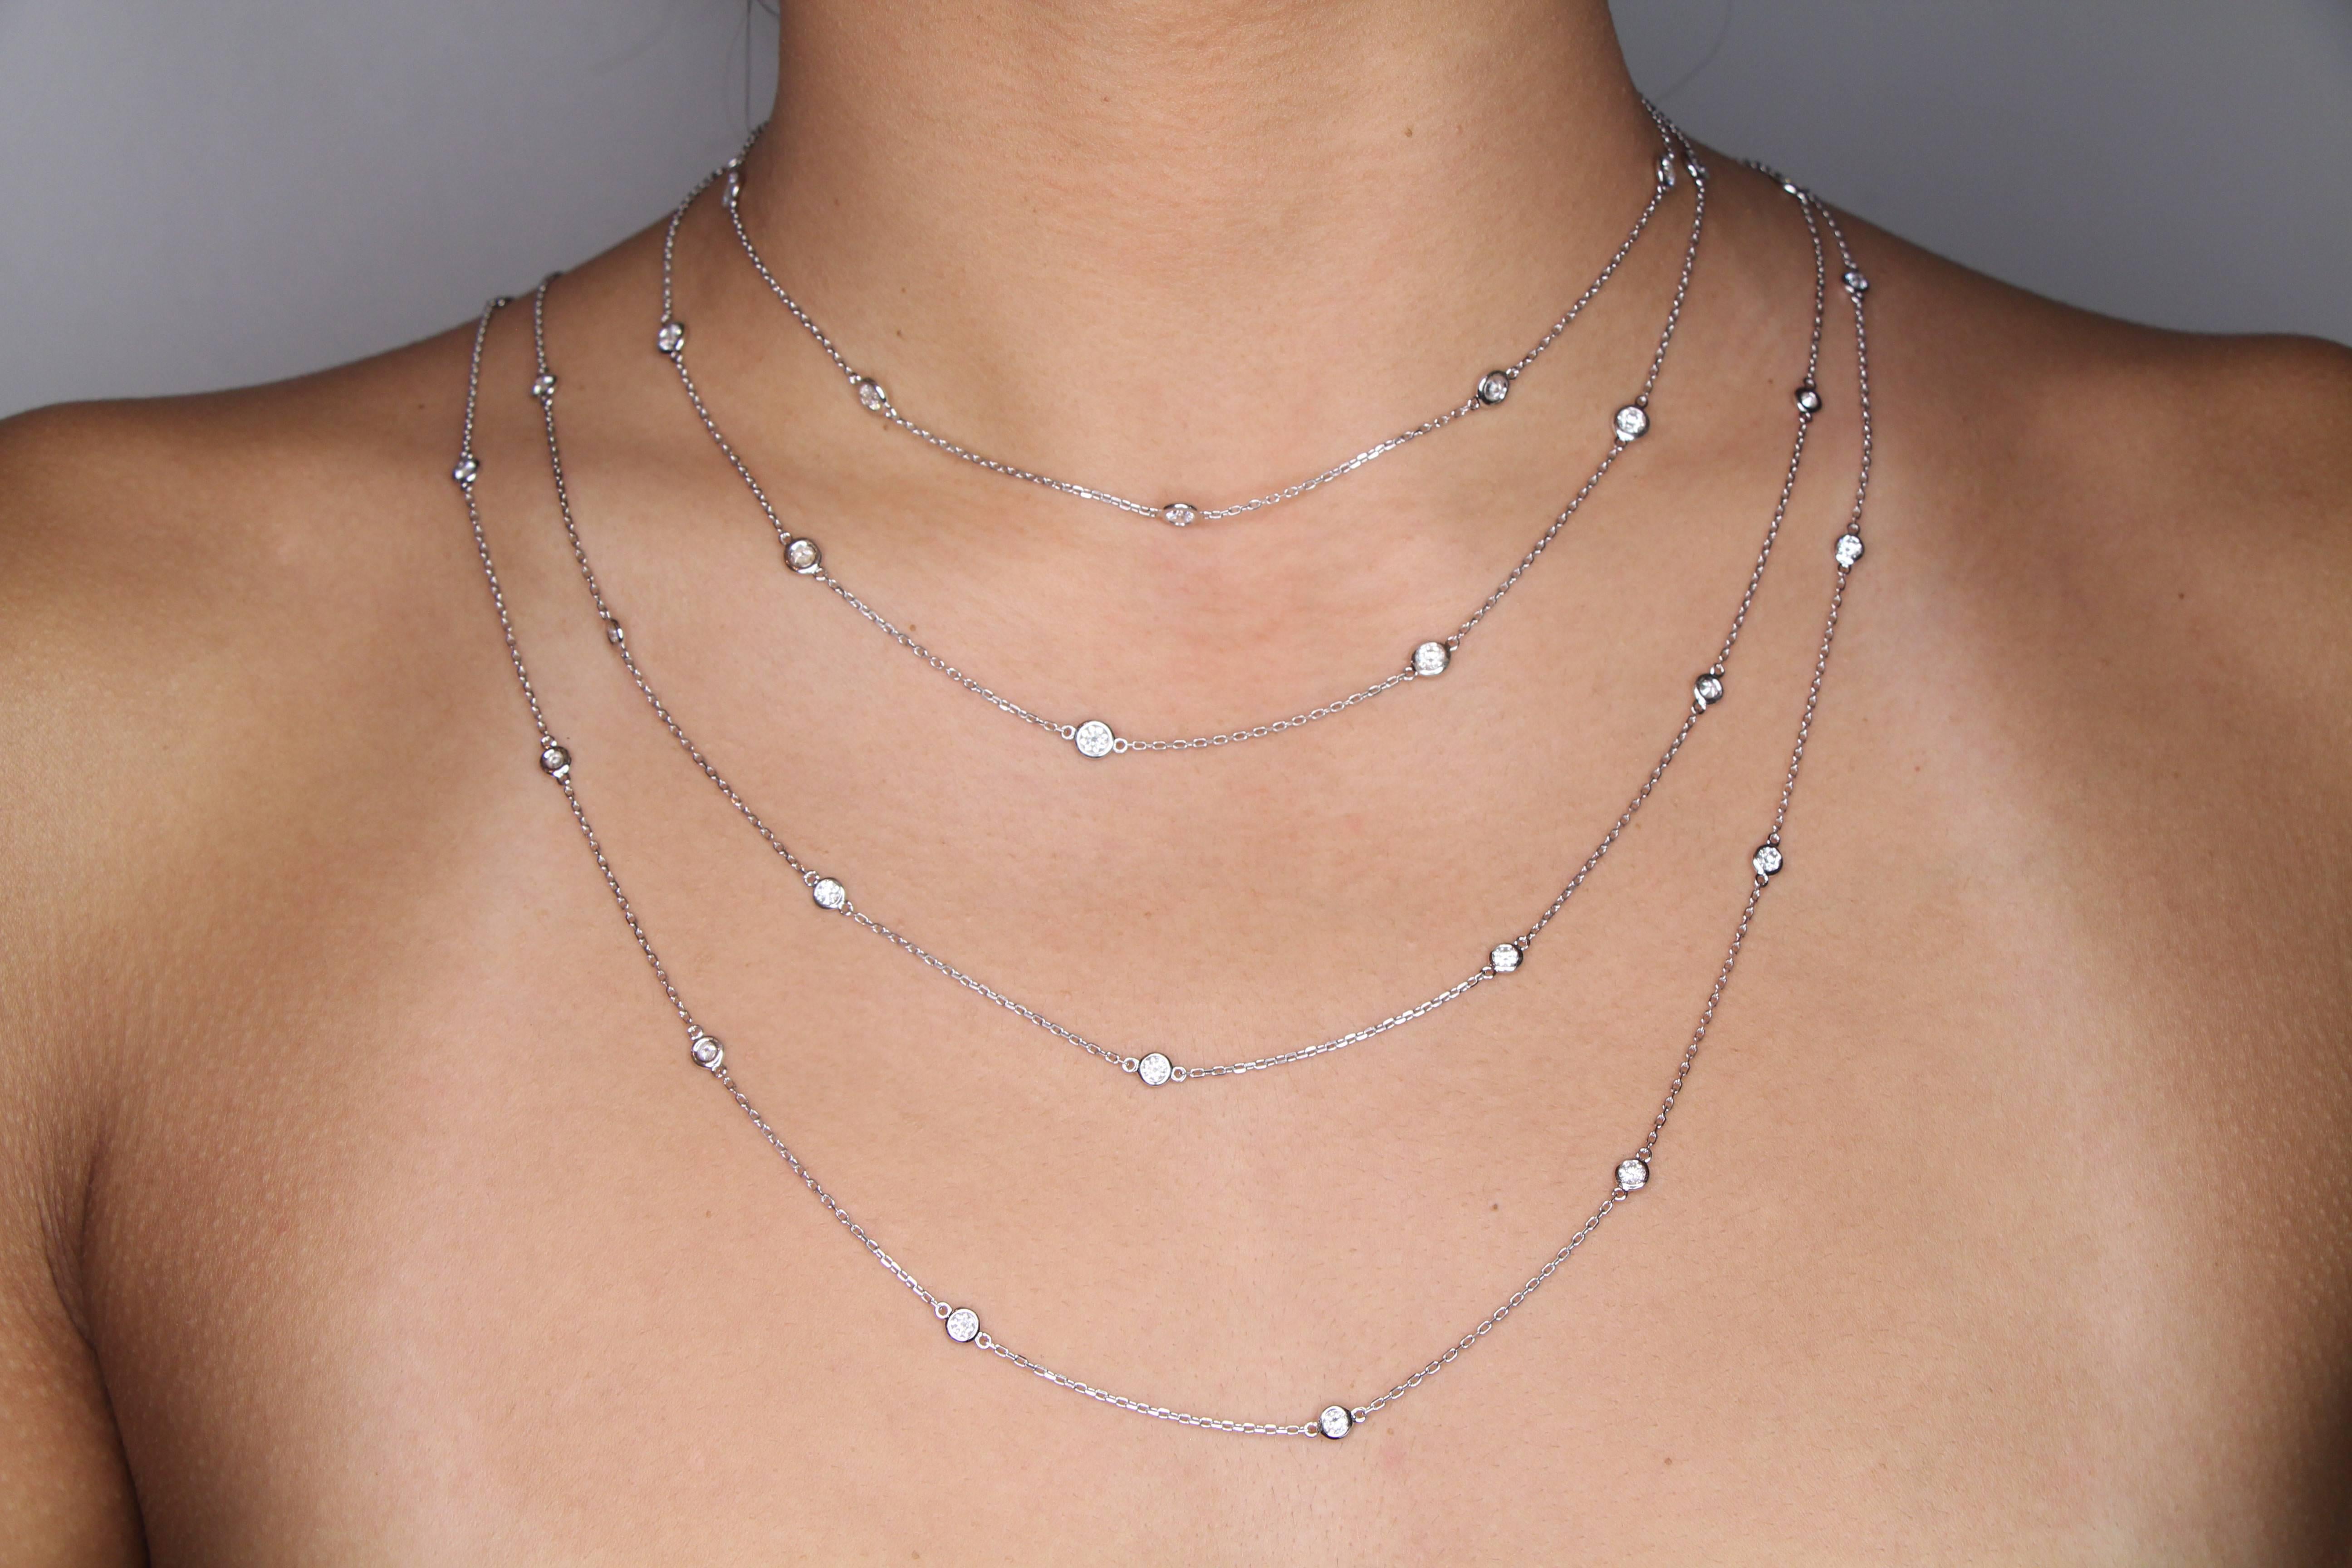 Beaded Long Necklace mesuring 90 cm Set with 17 Diamonds weighing 1.54 carats.
The Diamond are GVS qualities.
The Necklace is 18K White Gold.